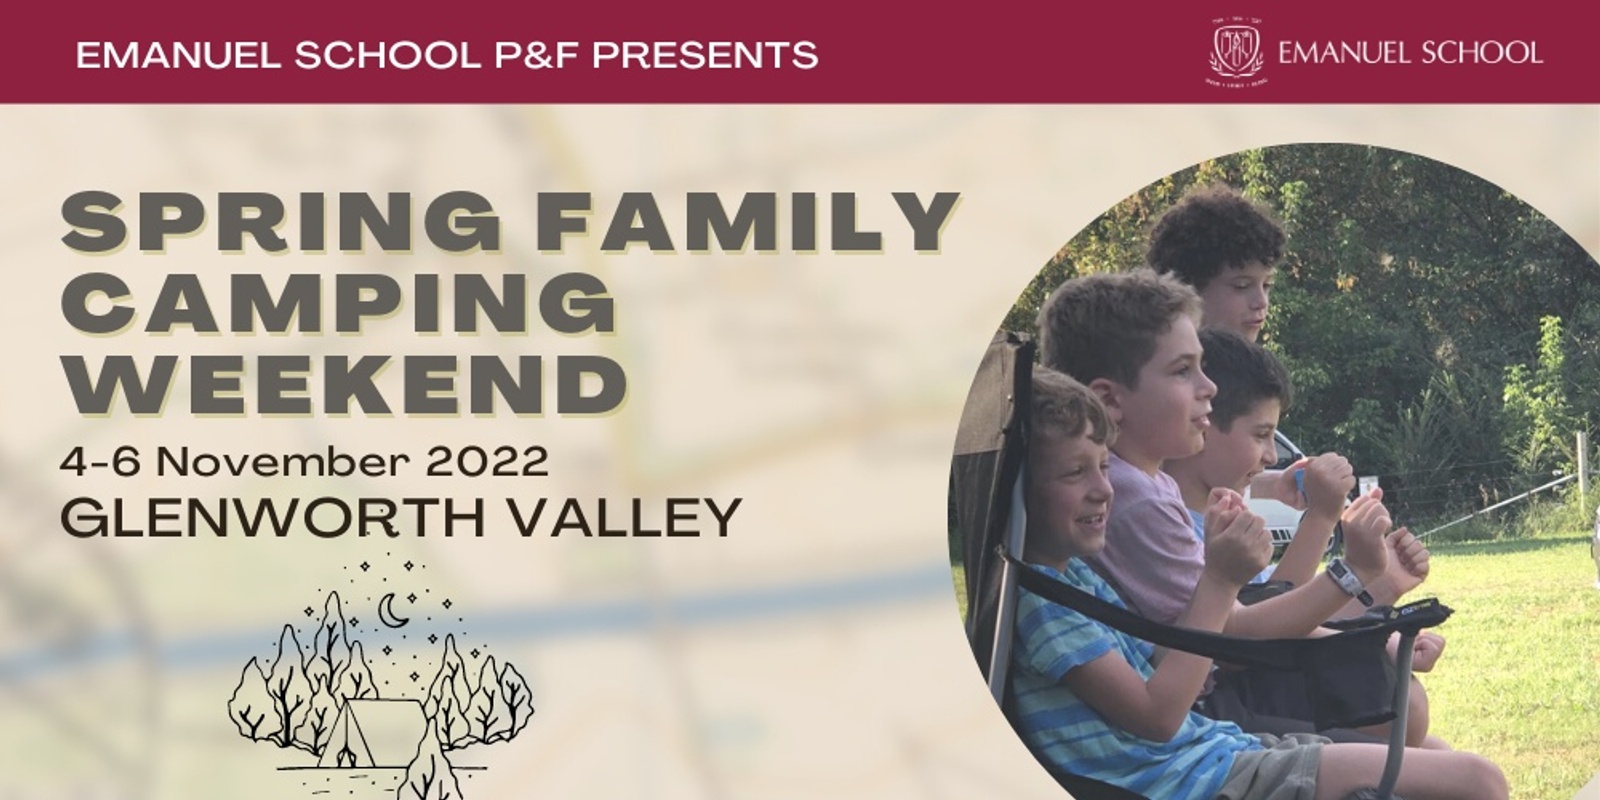 Banner image for Emanuel School P&F Spring Family Camping 